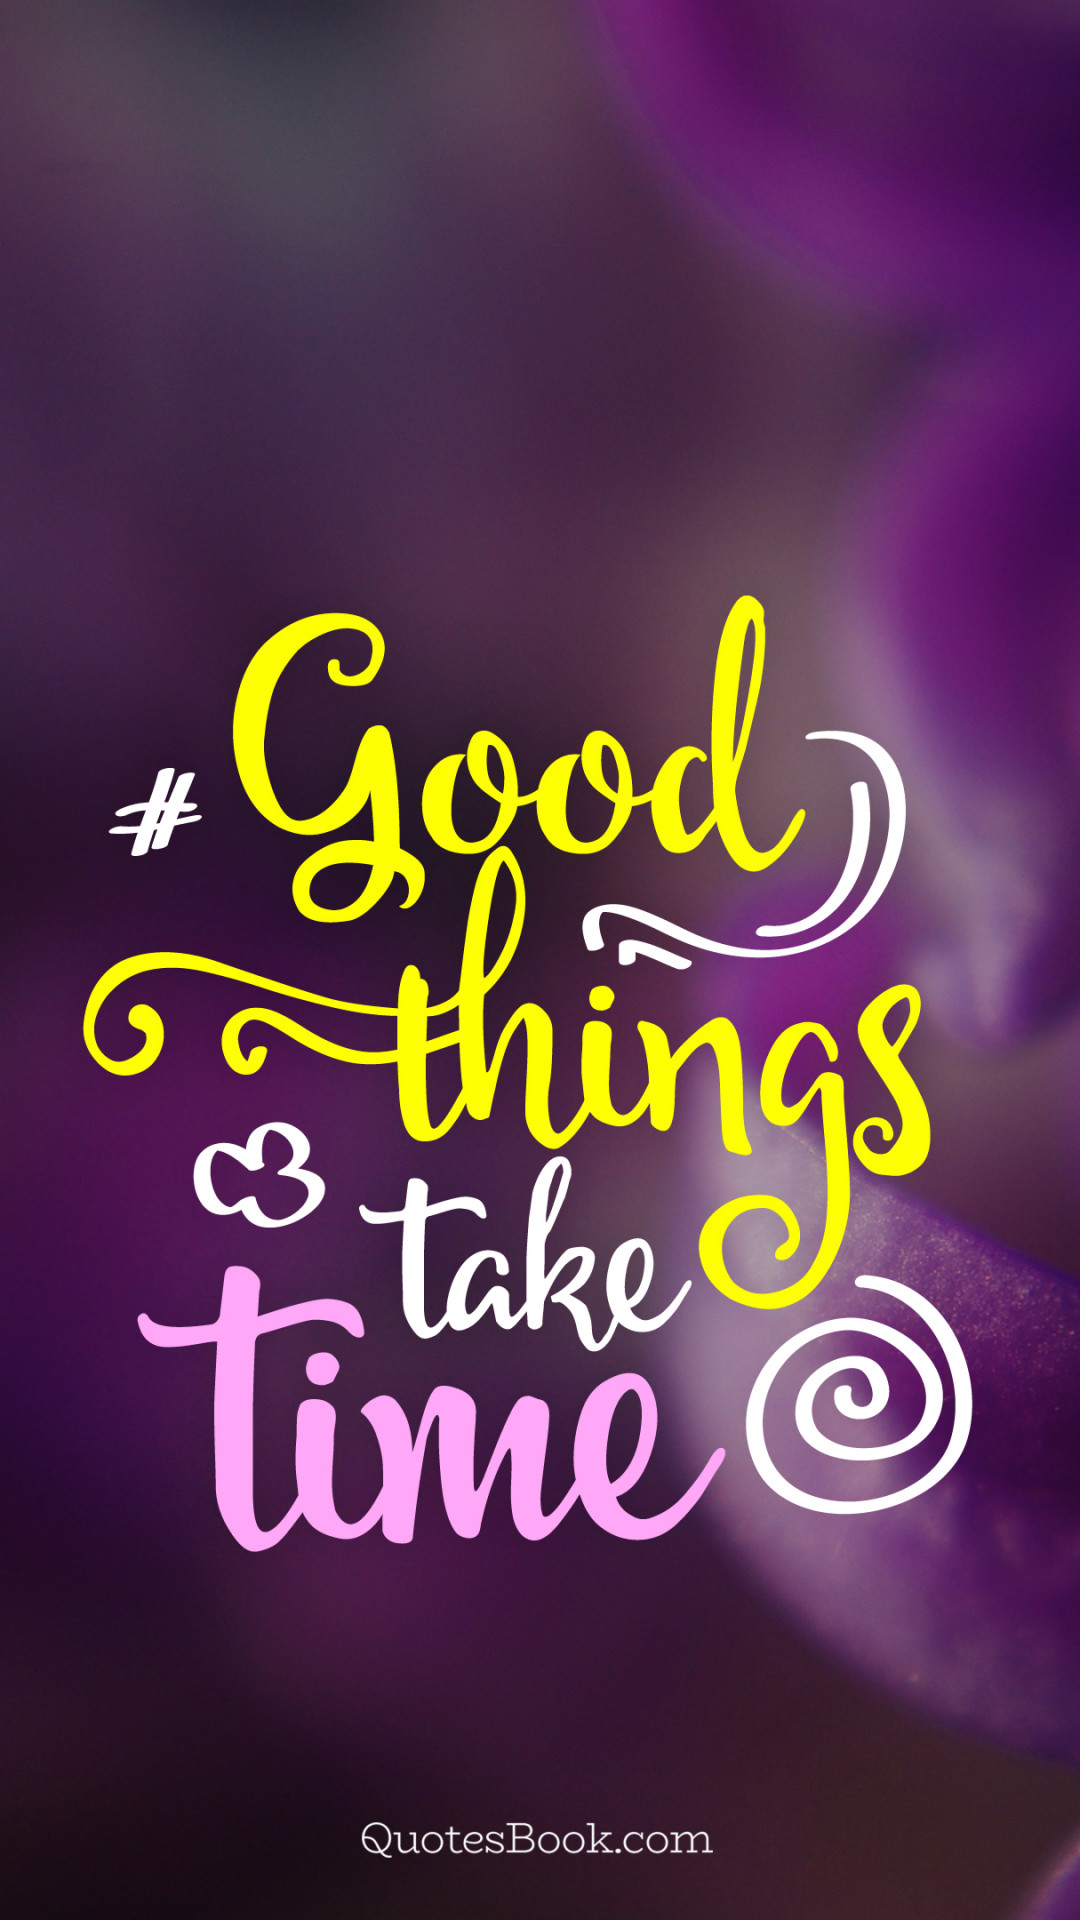 Good things take time - QuotesBook